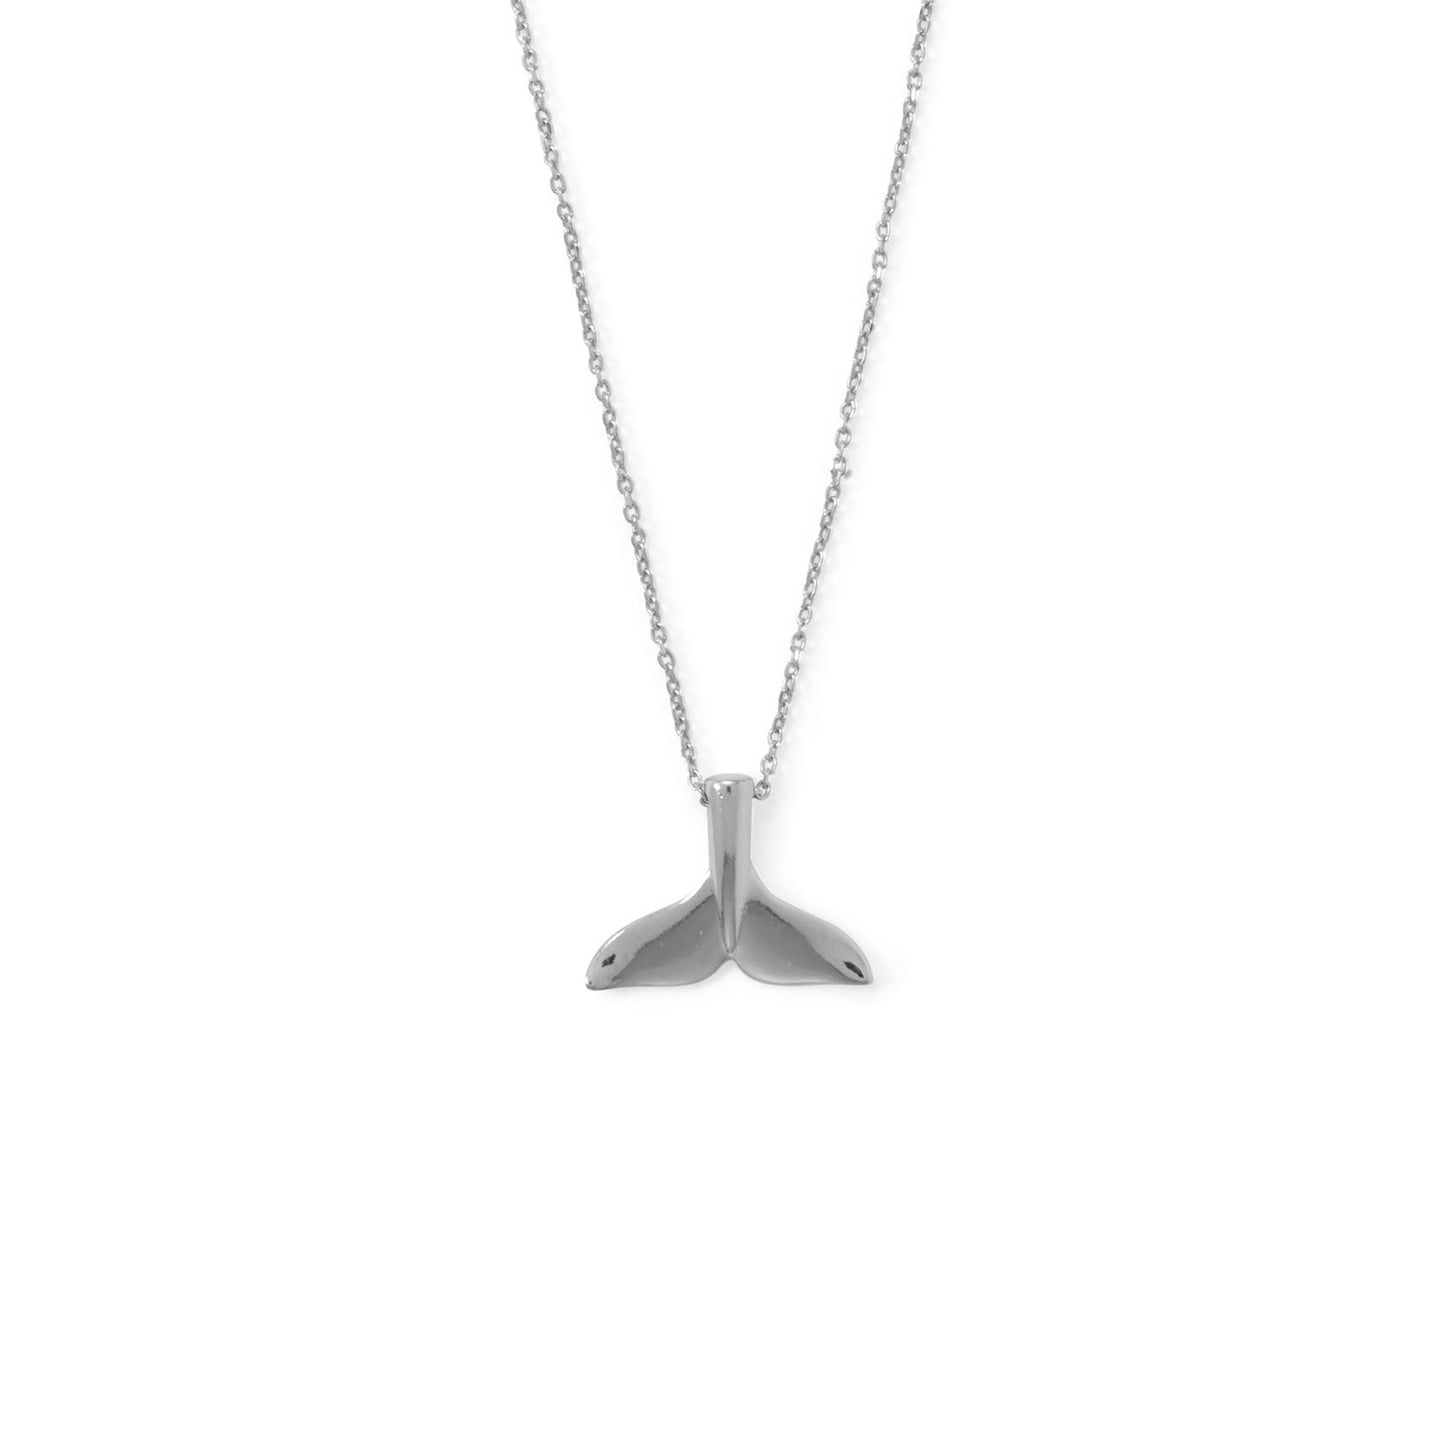 16" Rhodium Plated Whale Tail Necklace